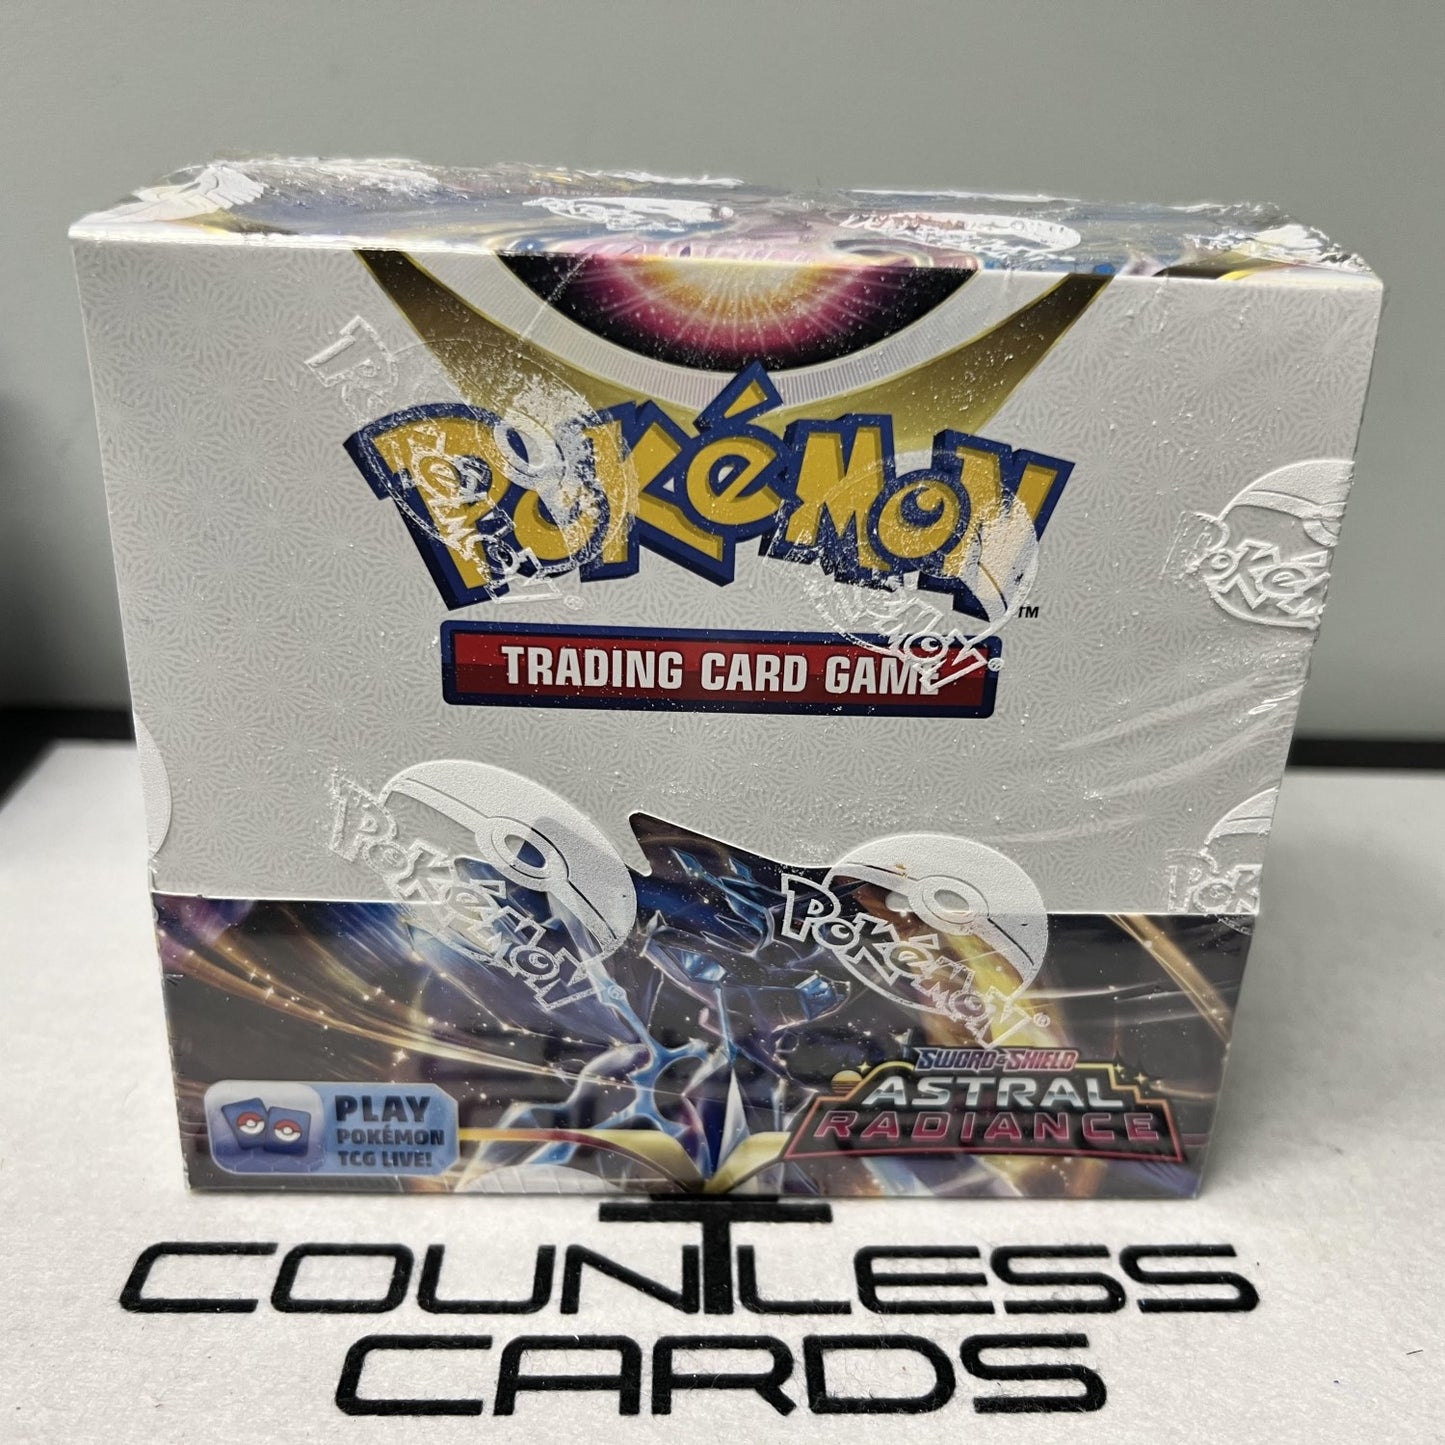 Pokemon TCG: Sword and Shield Astral Radiance Booster Box